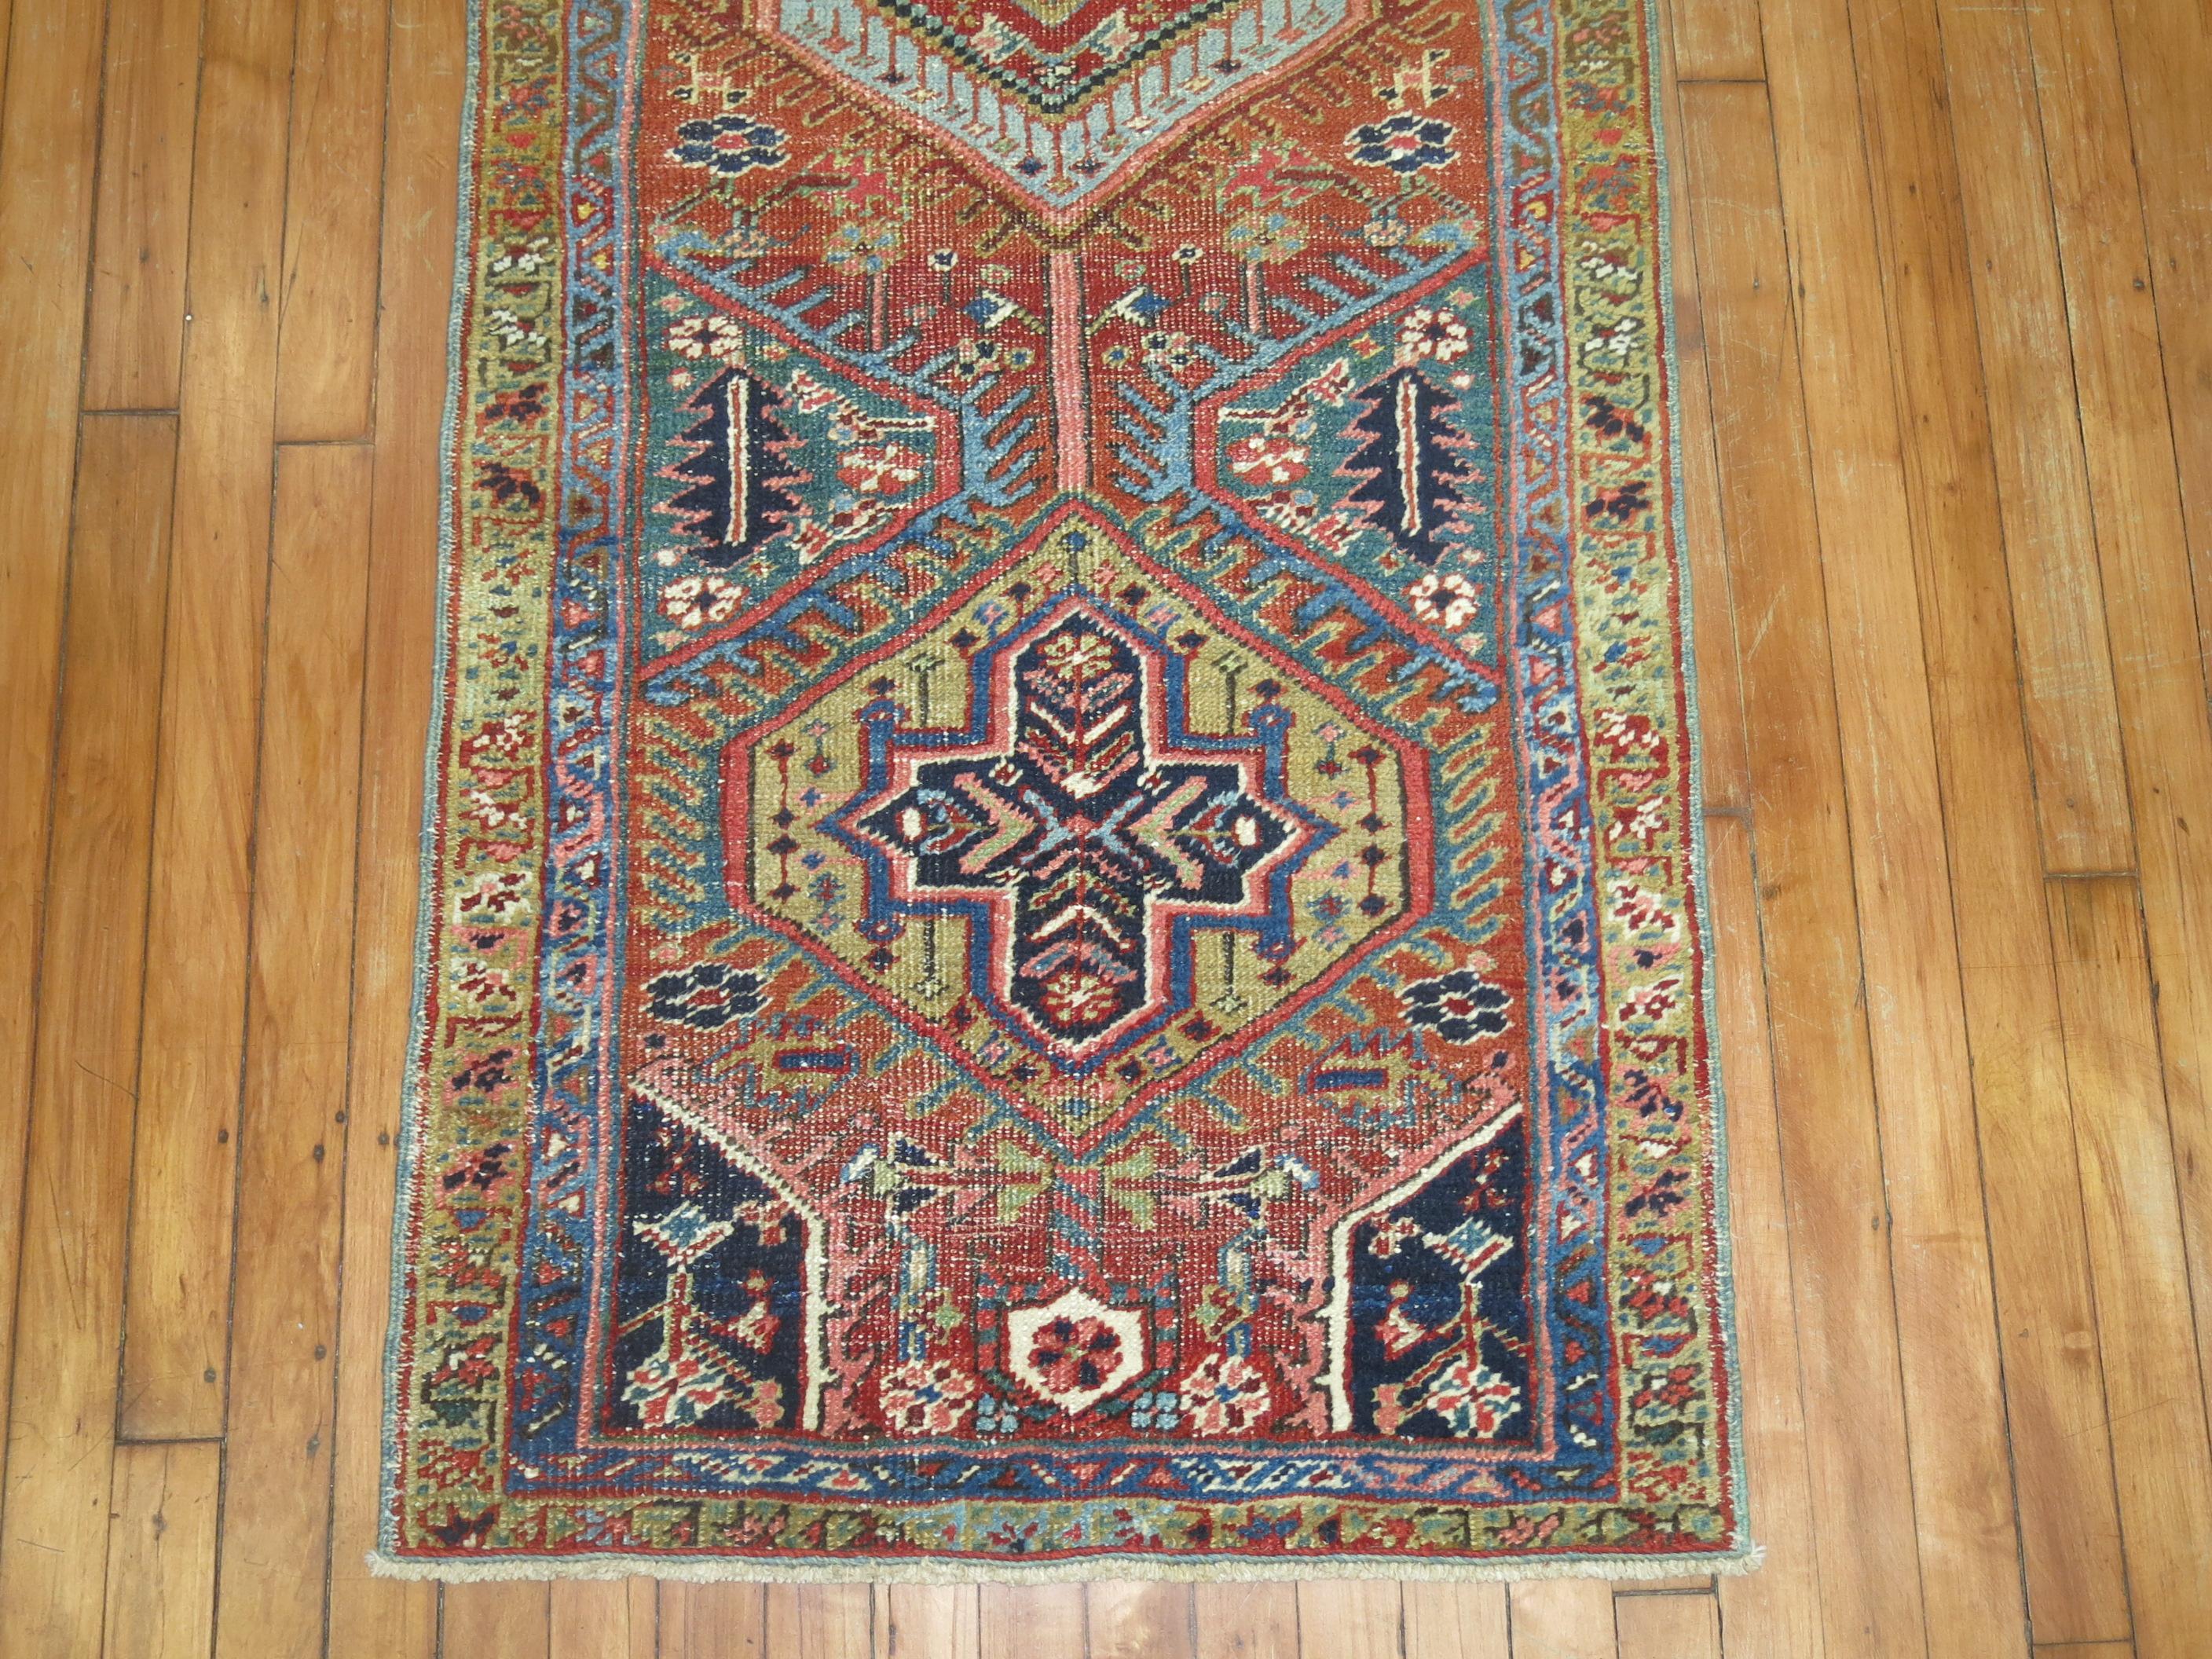 A one of a kind decorative antique Persian Heriz runner.

2'6'' x 8'10'' circa 1920

With distinctive large scale motifs and a wide ranging palette of warm colors, the antique Heriz carpet is probably the most popular of the Persian village carpets.